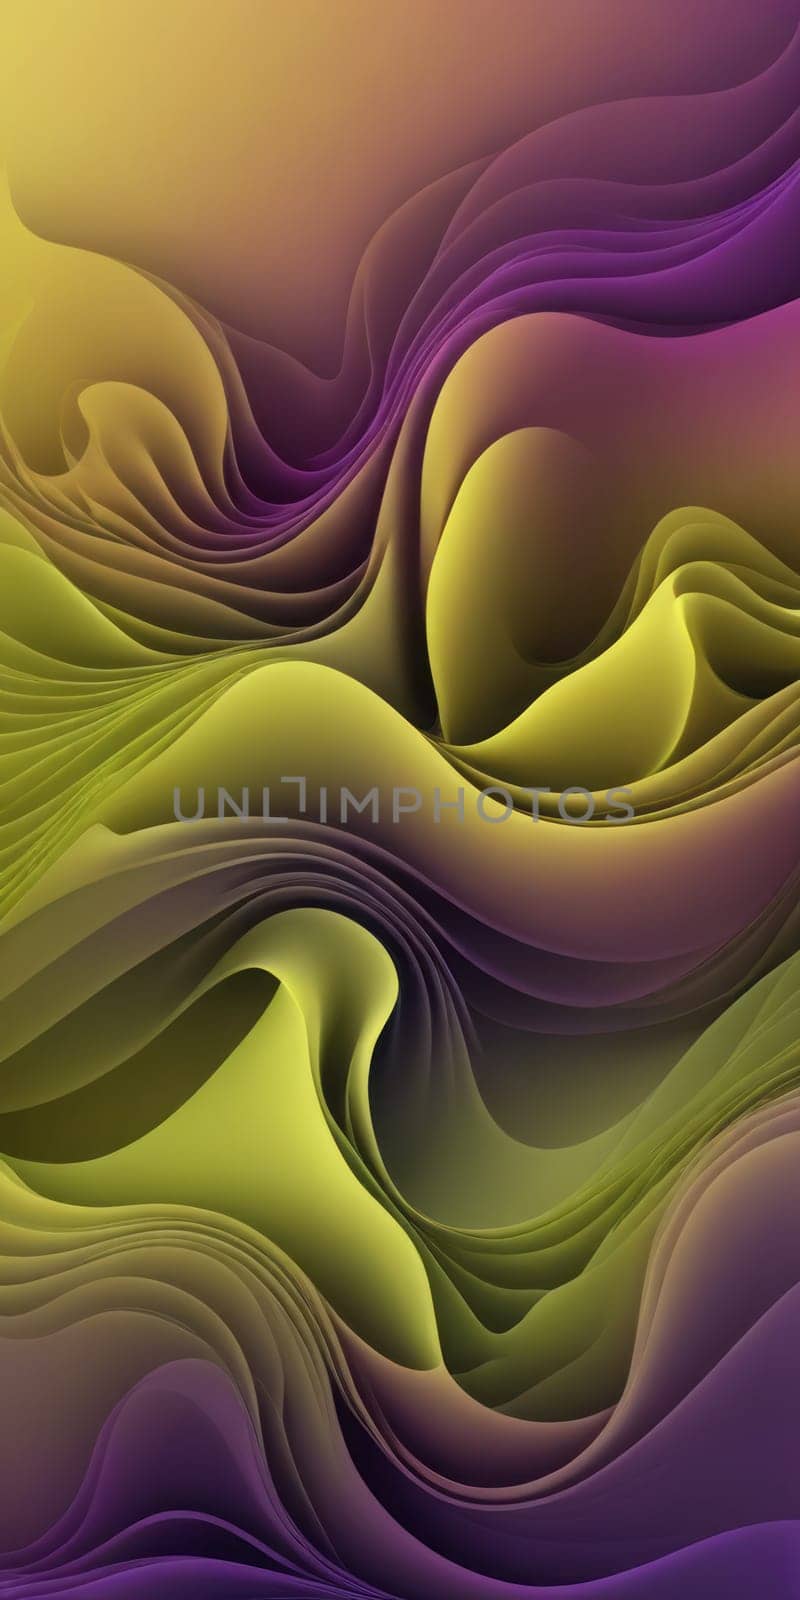 Fractal Shapes in Olive Purple by nkotlyar